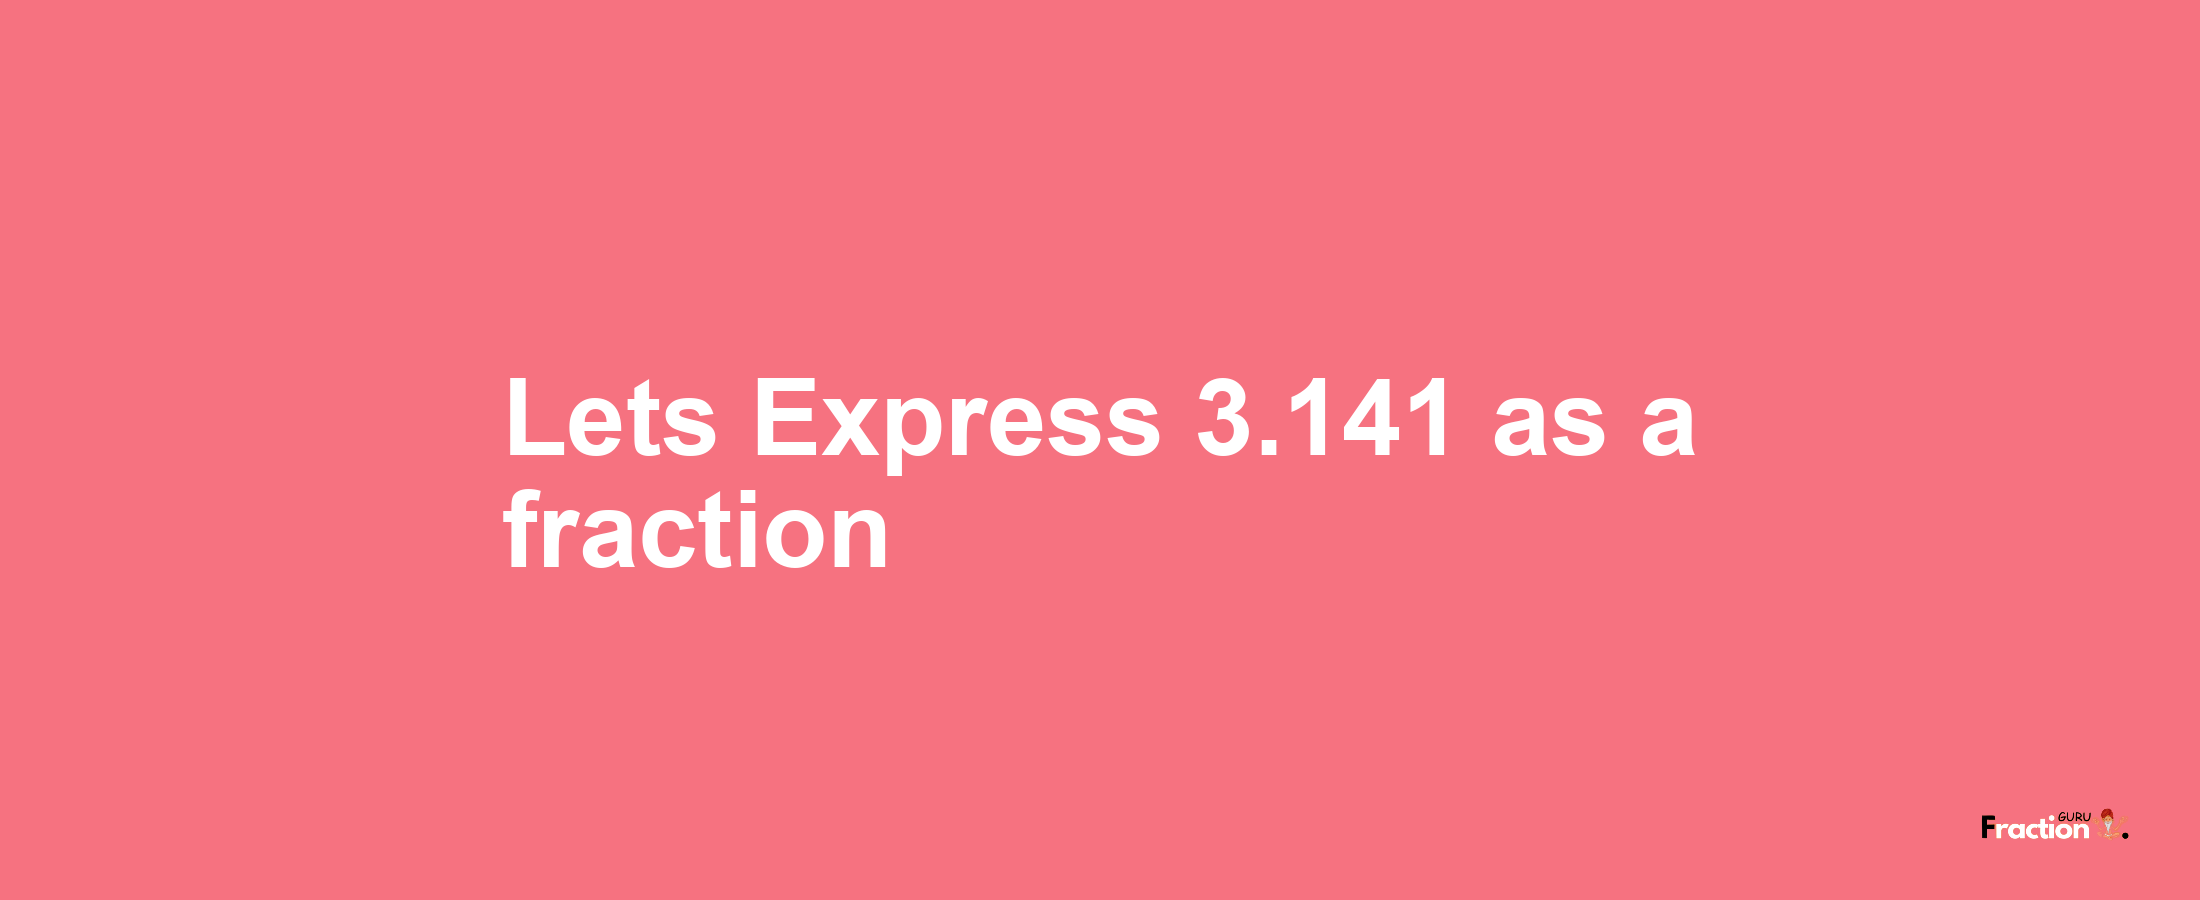 Lets Express 3.141 as afraction